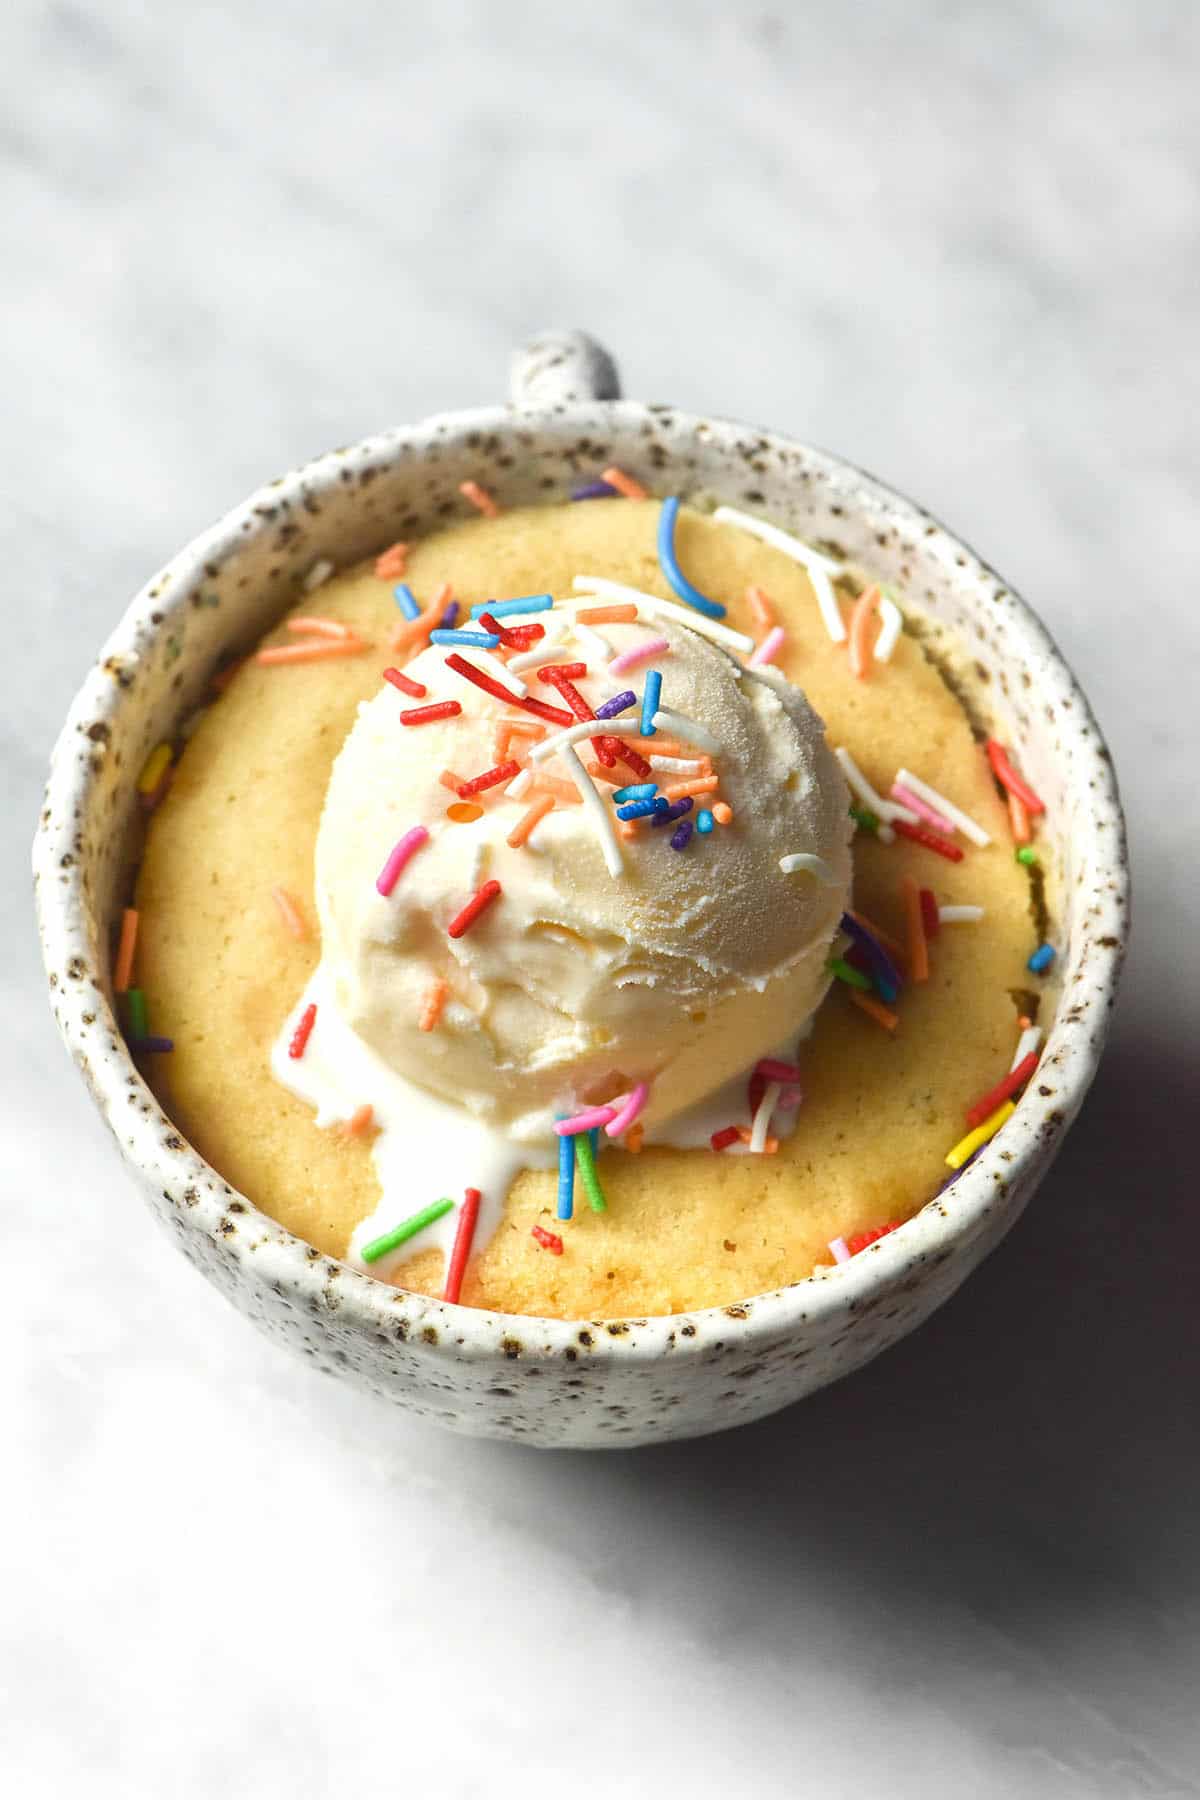 An aerial image of a gluten free vanilla mug cake topped with vanilla ice cream and rainbow sprinkles. The mug cake is in a white speckled ceramic mug on a white marble table